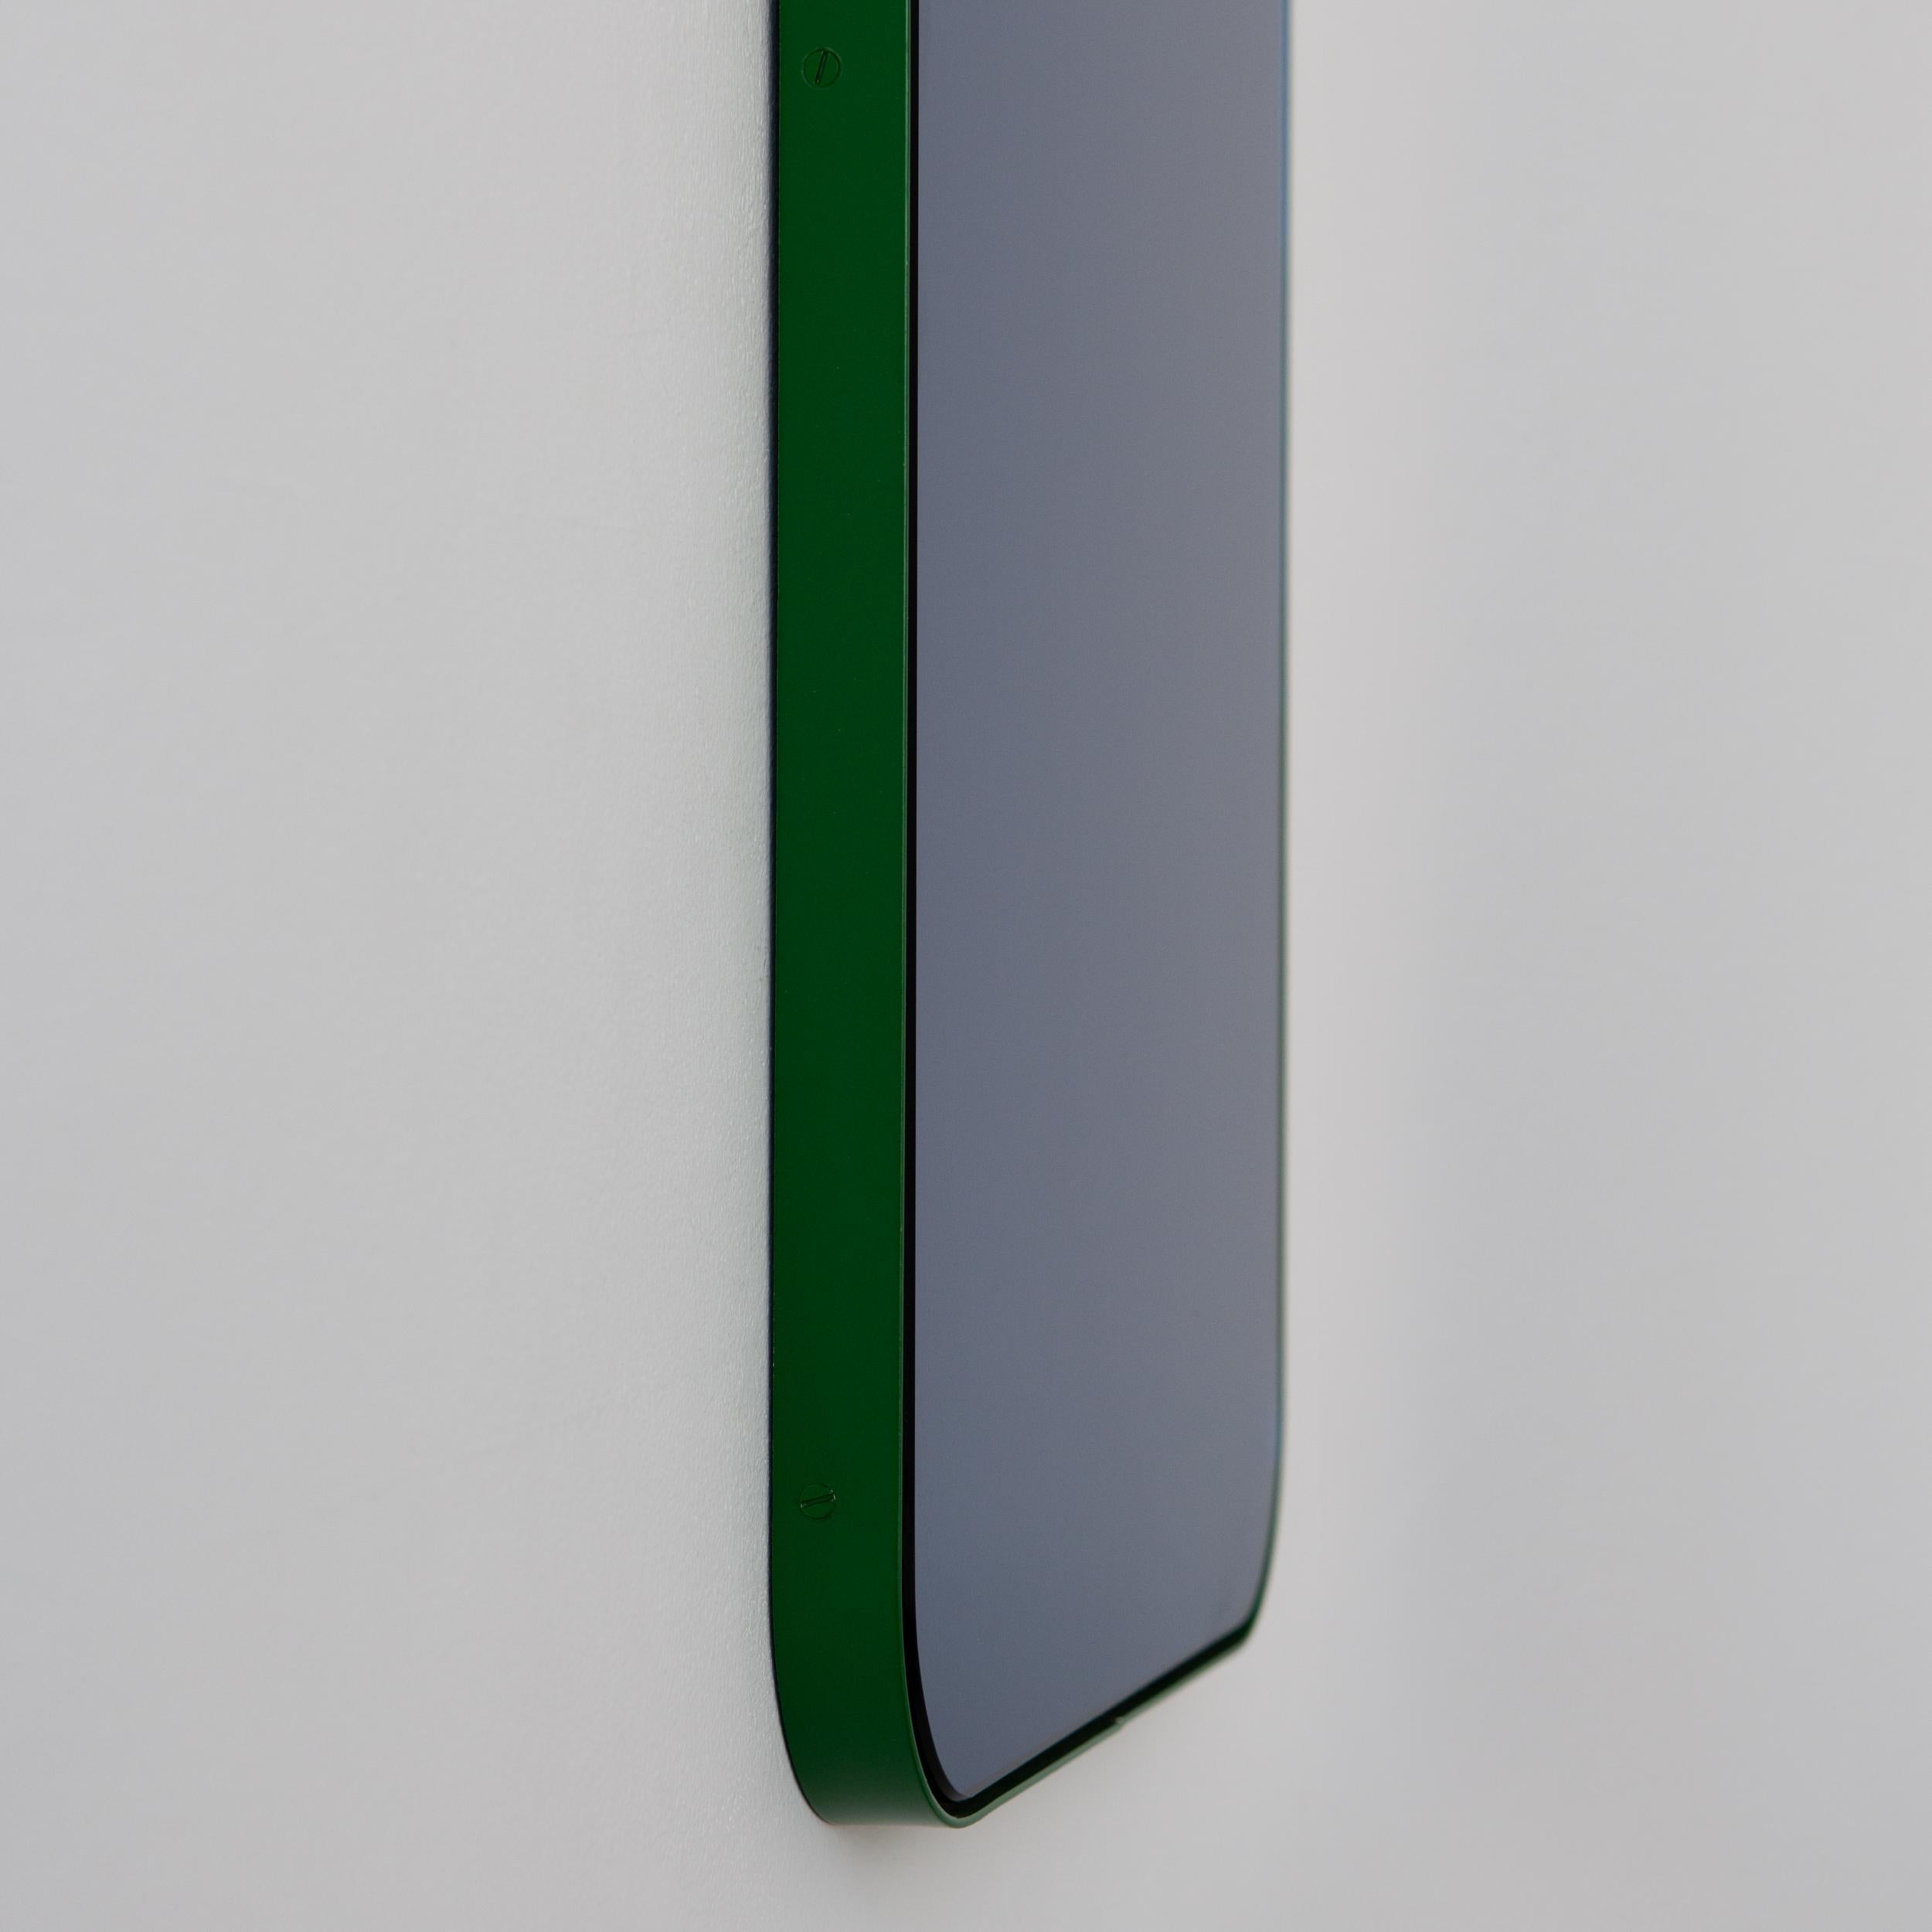 Quadris Rectangular Contemporary Blue Mirror with a Modern Green Frame, Large In New Condition For Sale In London, GB